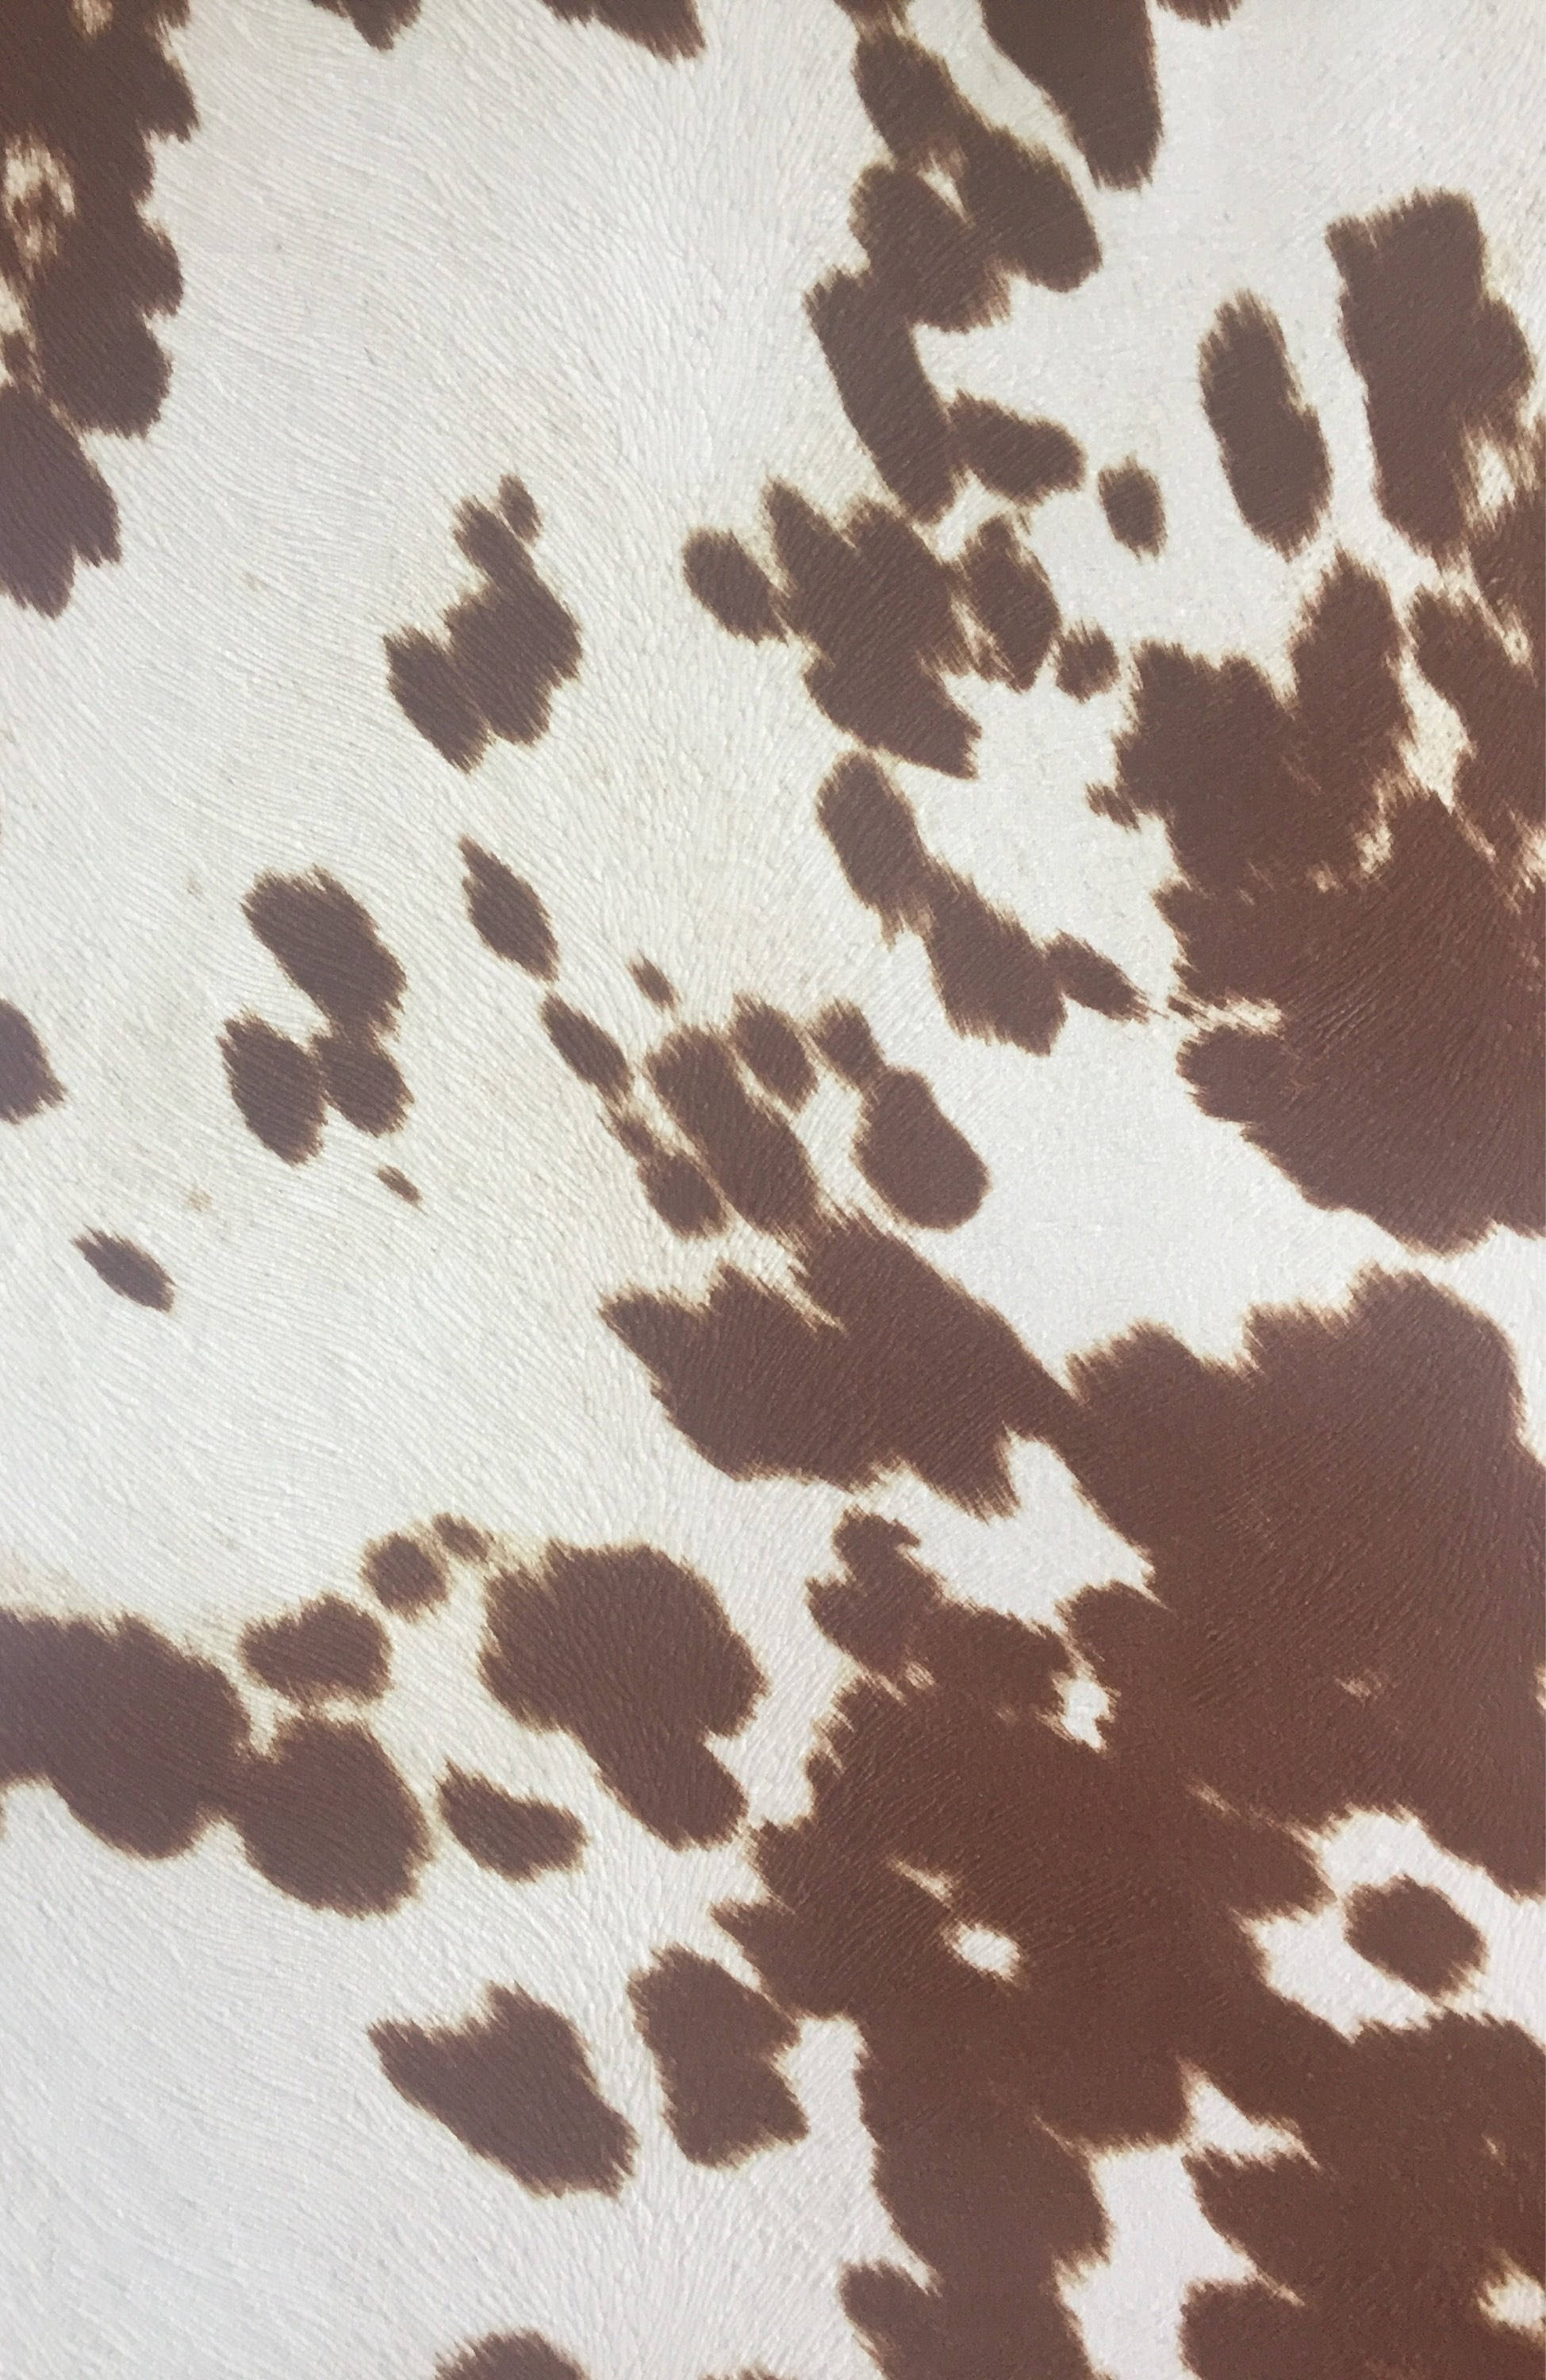  Cow Print Fabric by The Yard, Cowhide Upholstery Fabric, Cow  Animal Skin Decorative Fabric, Highland Cow Farmhouse Indoor Outdoor  Fabric, DIY Art Waterproof Fabric, Brown Beige, 1 Yard